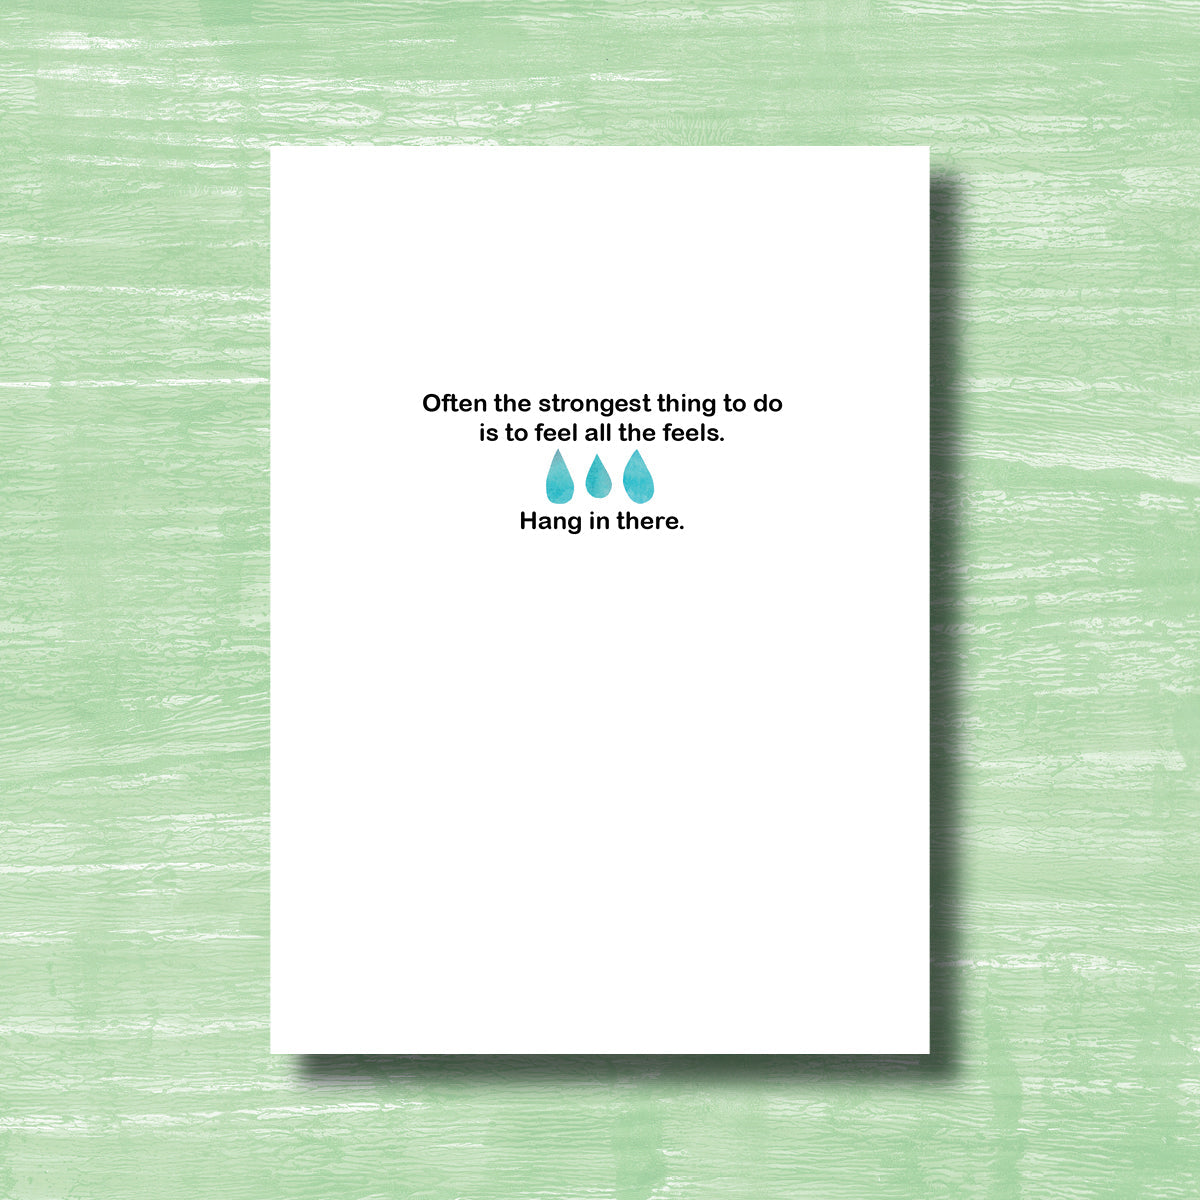 Let the Tears Flow - Greeting Card